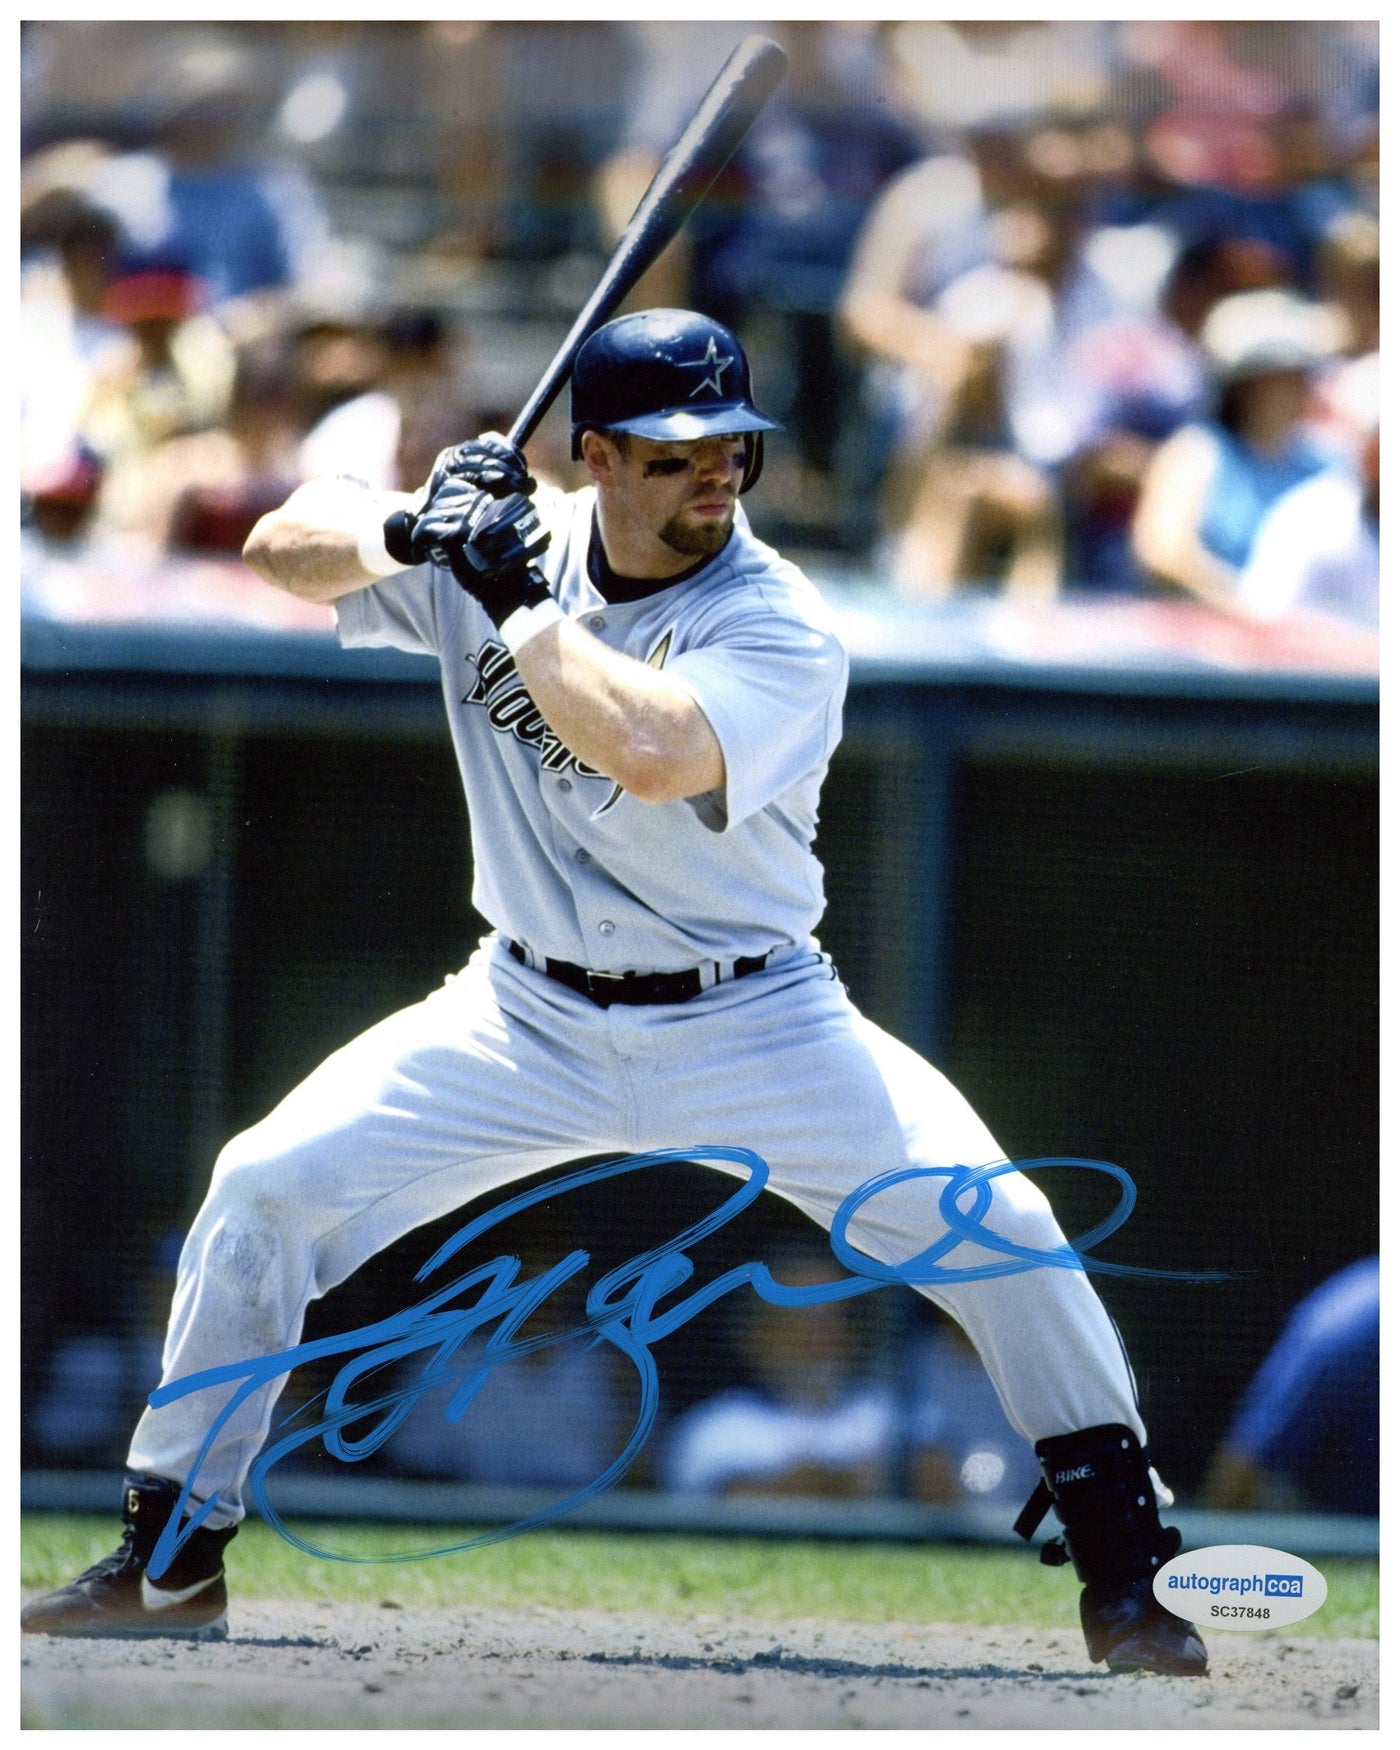 Jeff Bagwell Signed 8x10 Photo Houston Astros Autographed Autograph COA